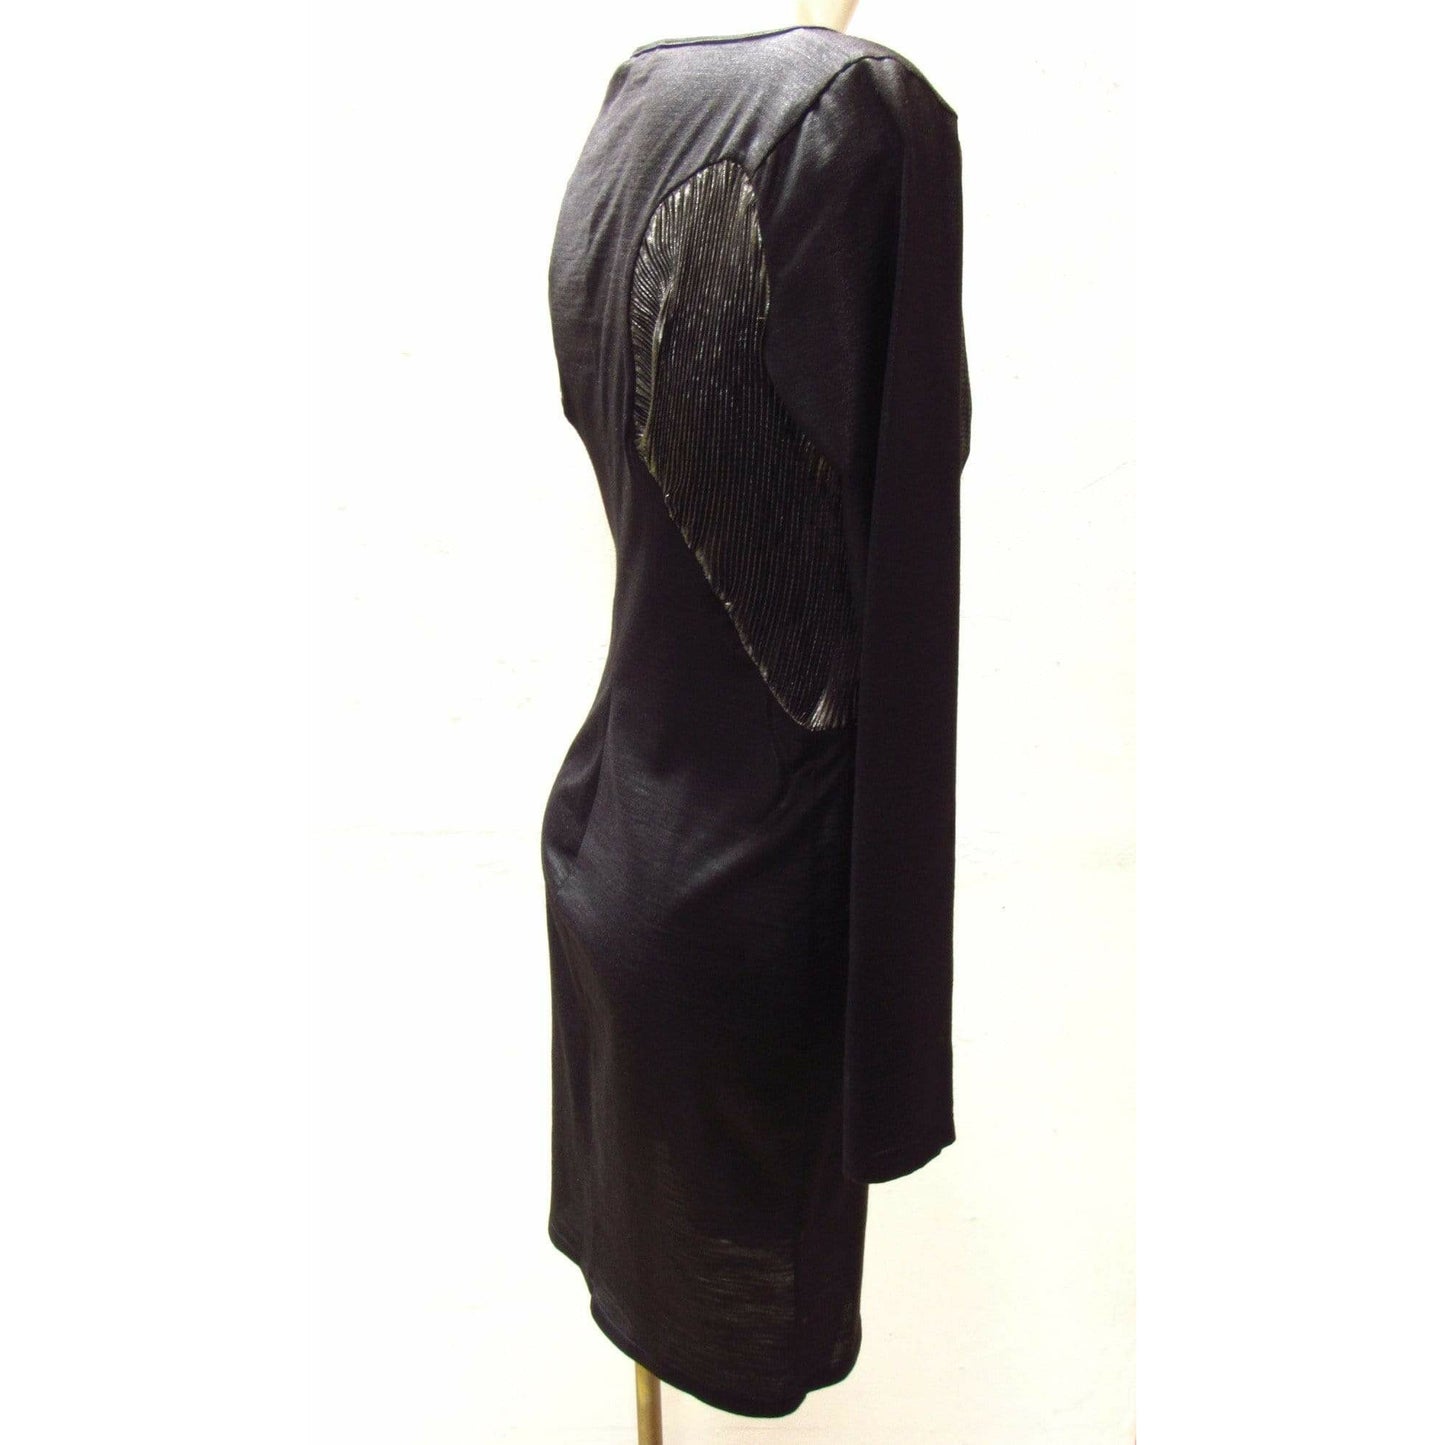 hussein-chalayan-black-and-silver-dress Dresses Black